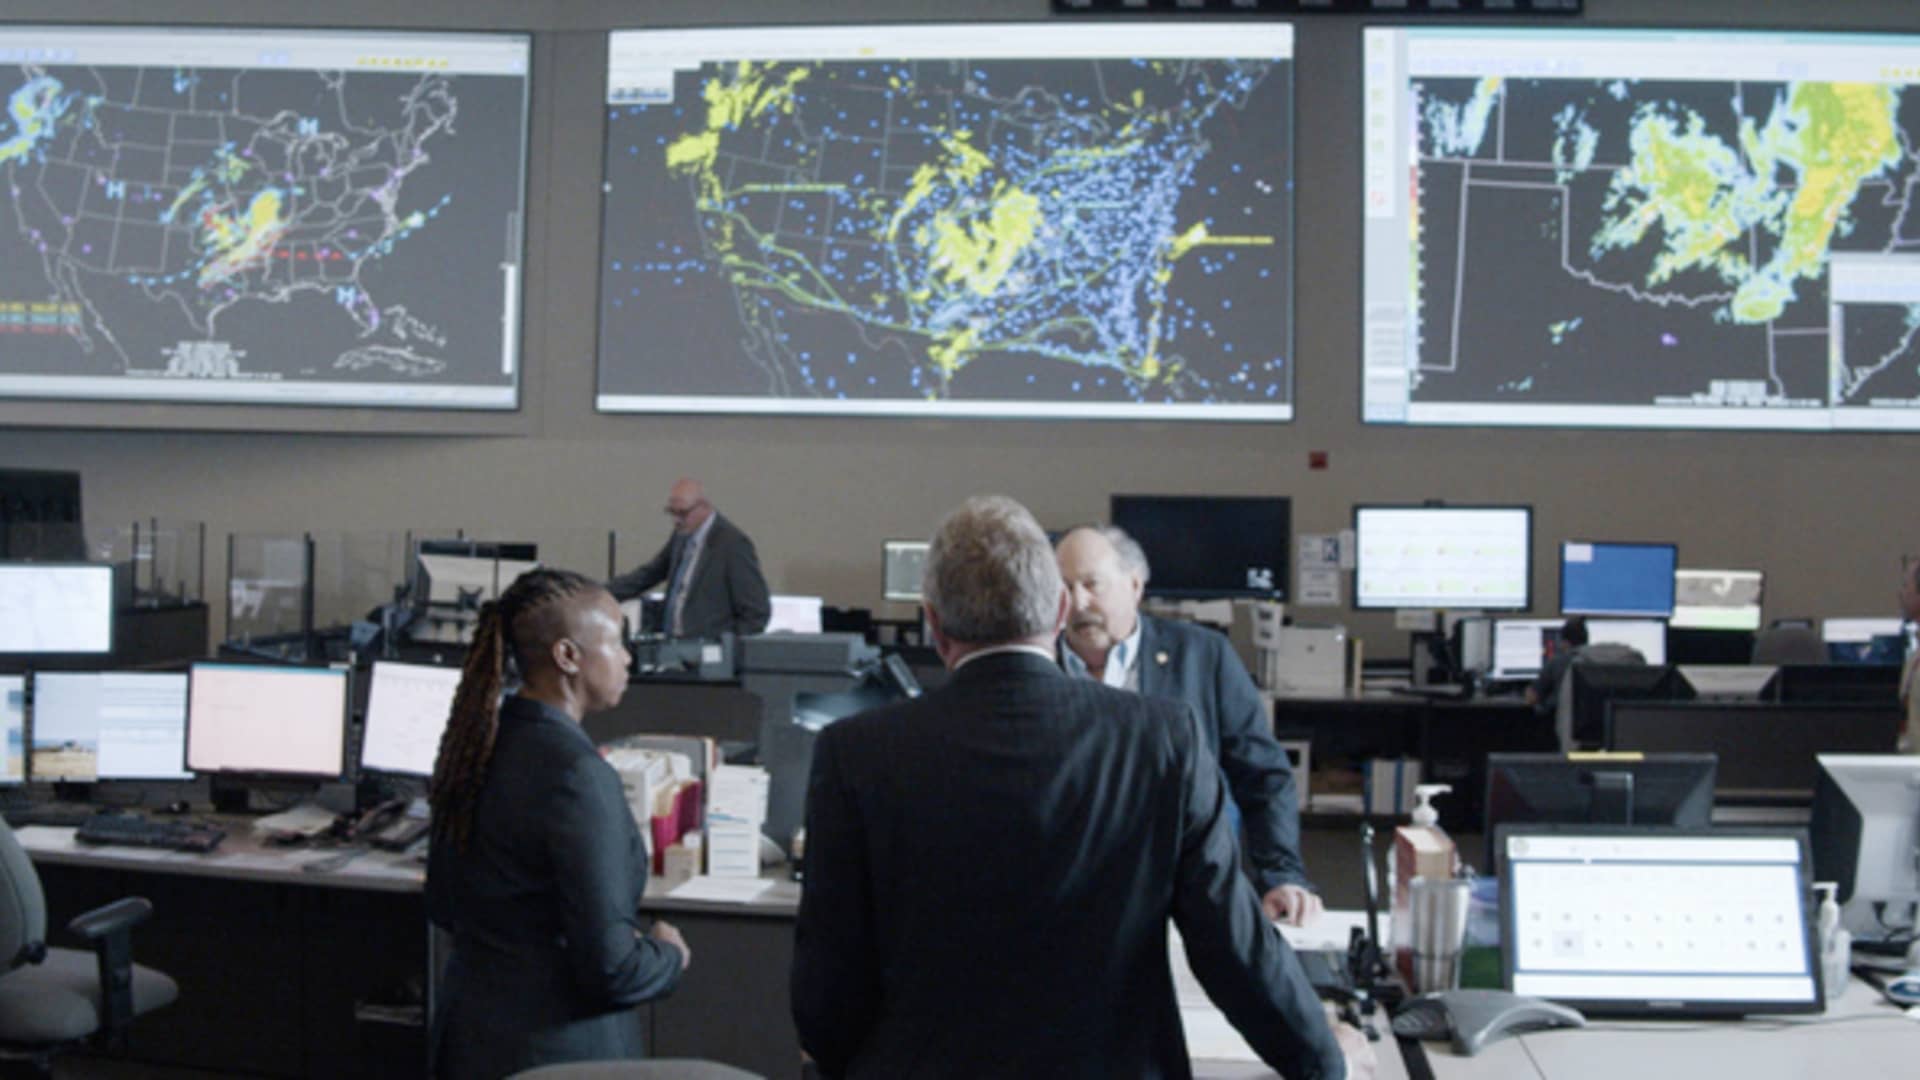 The FAA's Air Traffic Control System Command Center.